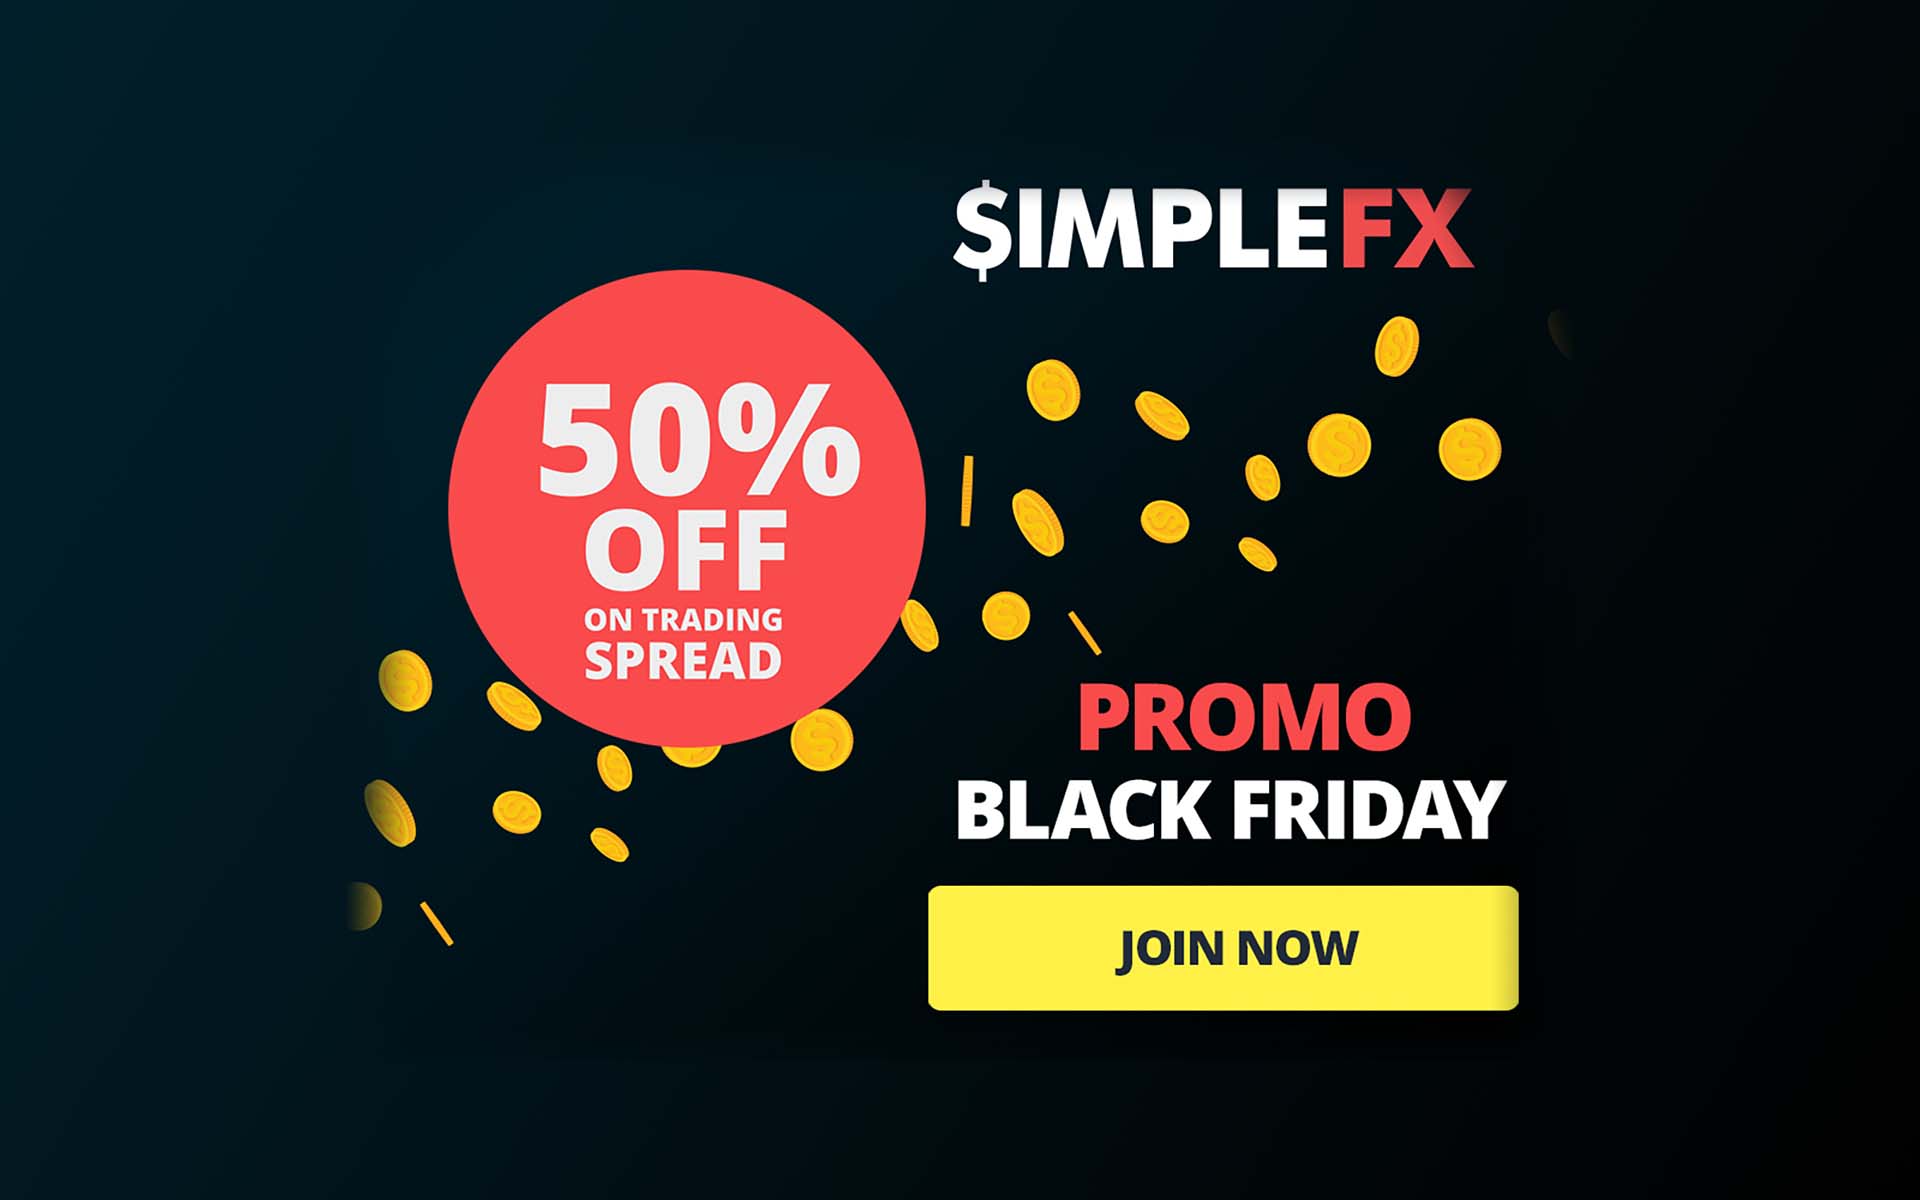 Black Friday 50% OFF spreads at SimpleFX